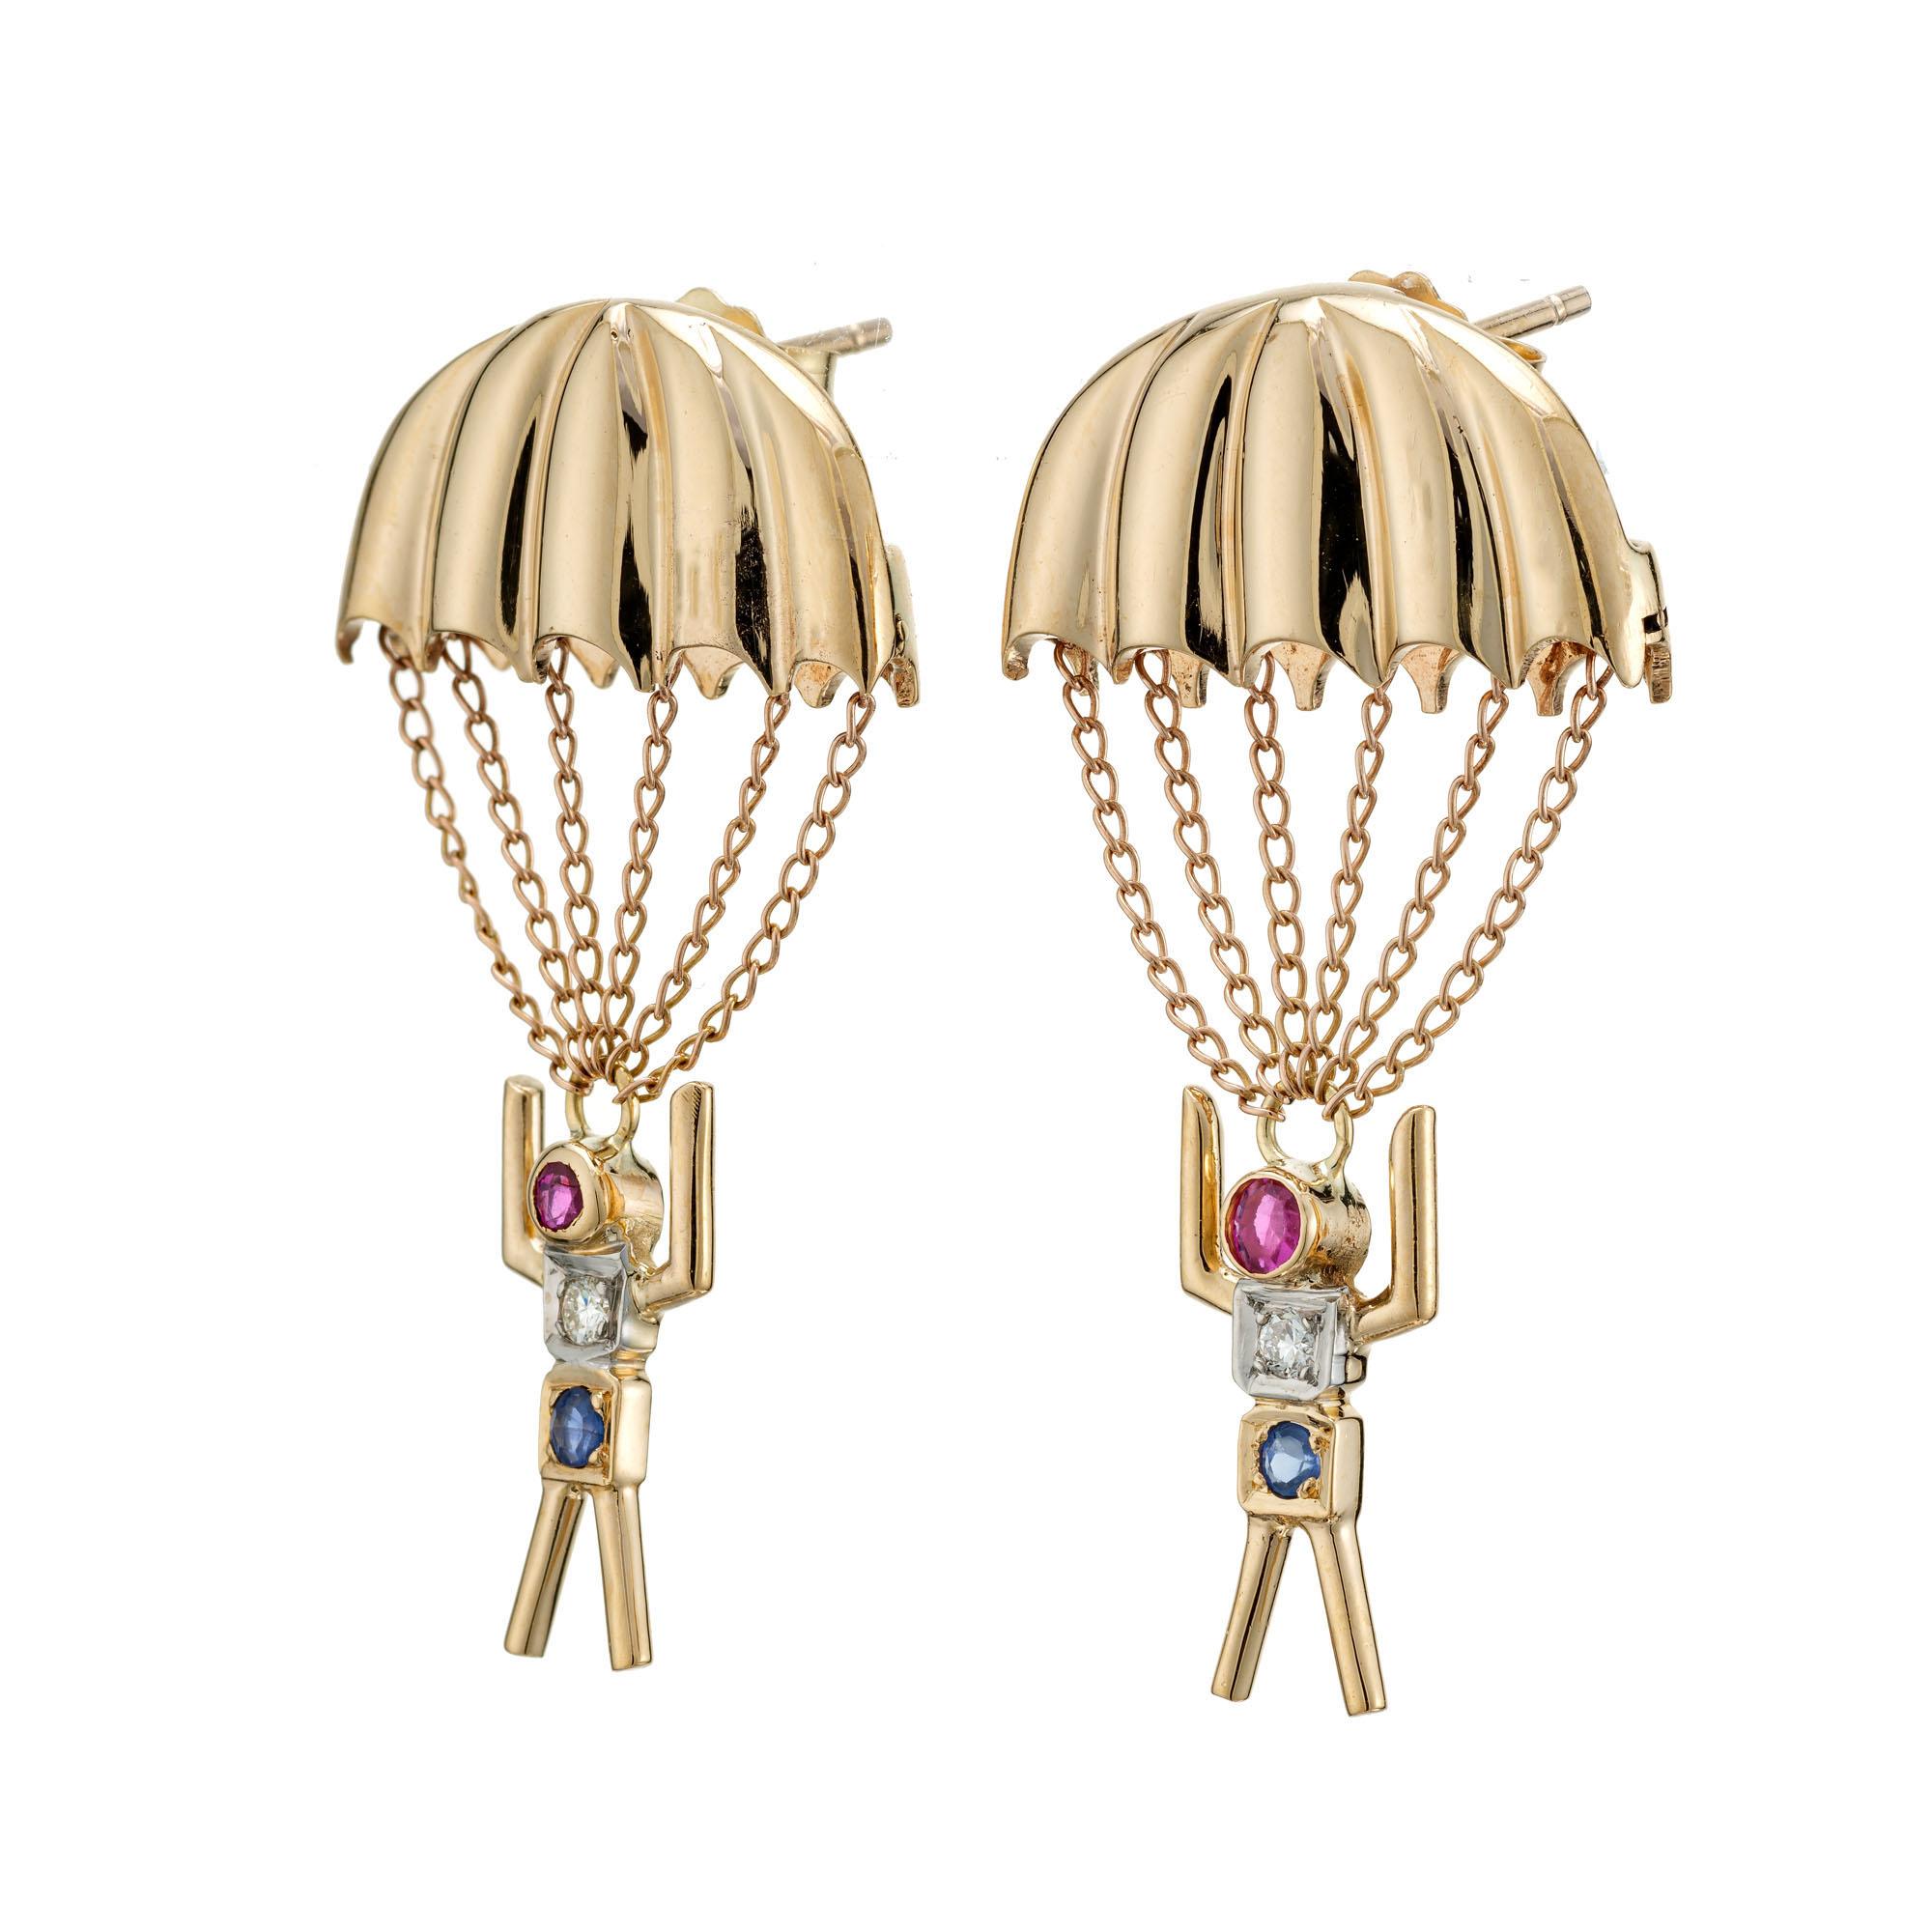 1950's Ruby, diamond and sapphire 14k yellow gold Parachute dangle earrings, with 12, 14k rose chains. 

2 round red rubies, approx. .8cts
2 round diamonds, H VS approx. .4cts
2 round blue sapphires, approx. .6cts
14k yellow gold 
Tested: 14k
5.2